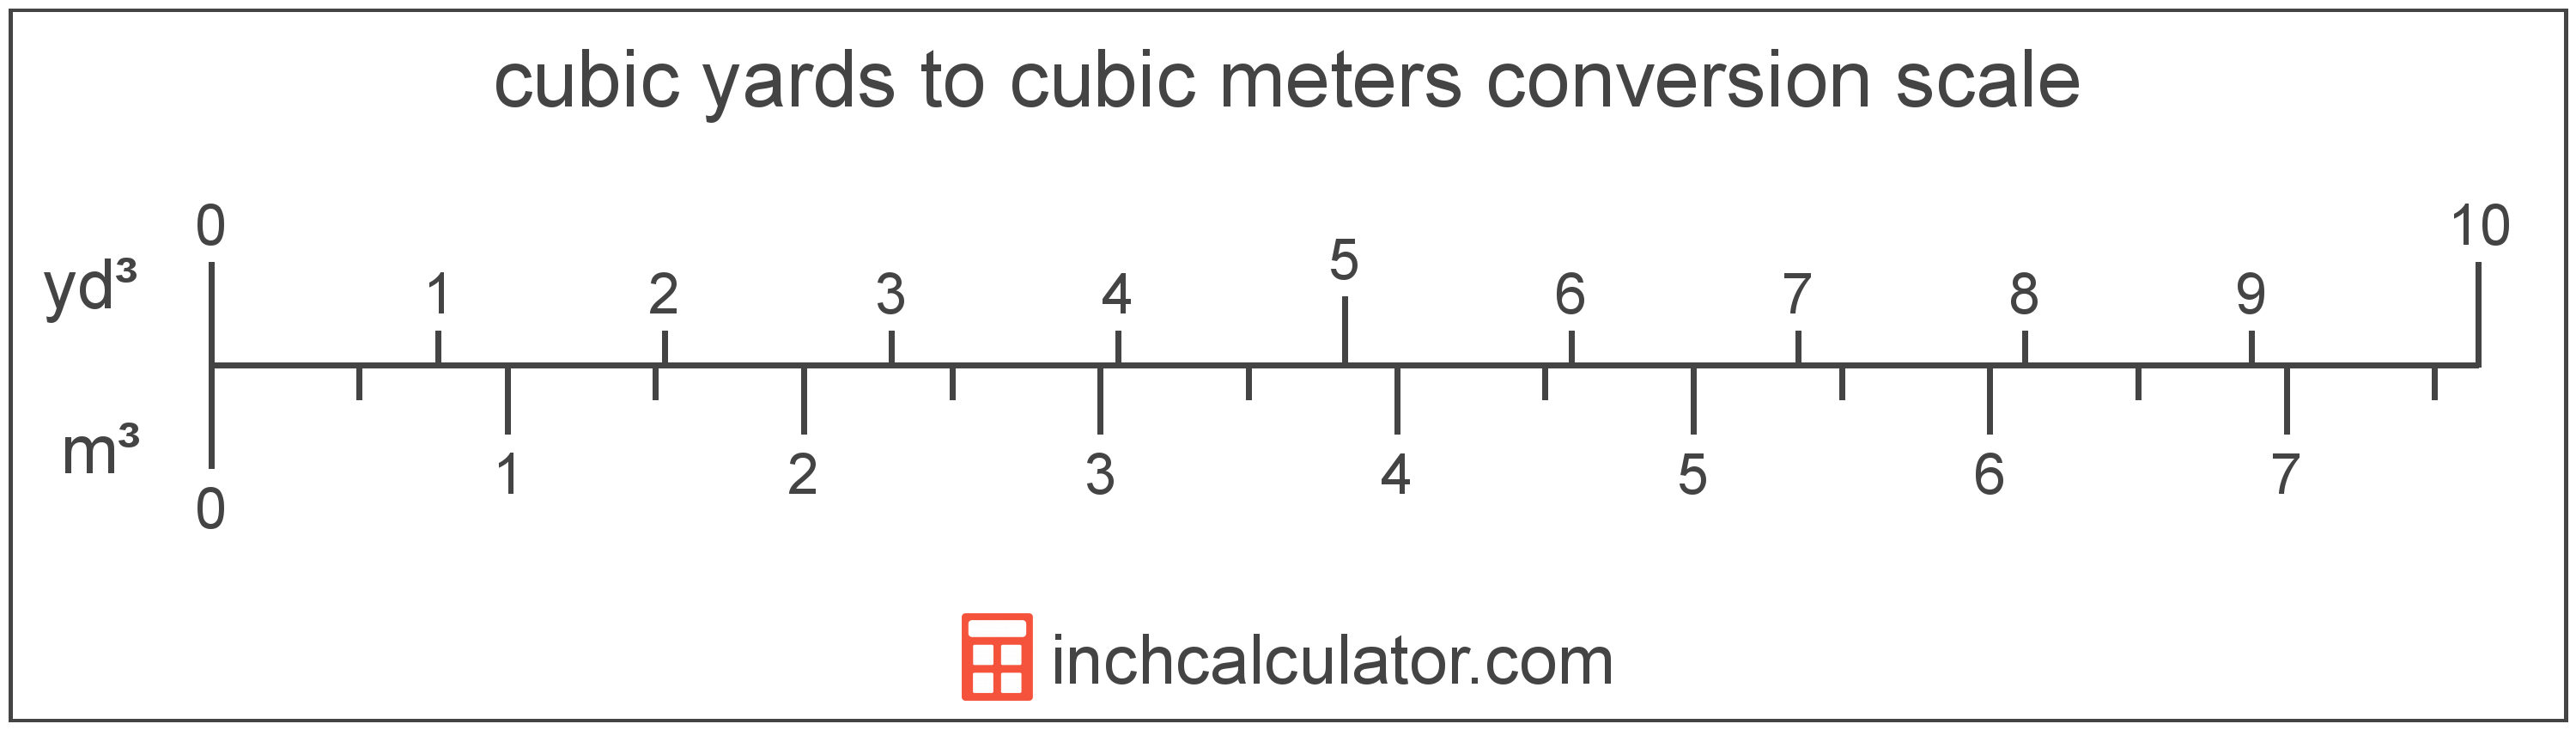 conversion scale showing cubic yards and equivalent cubic meters volume values